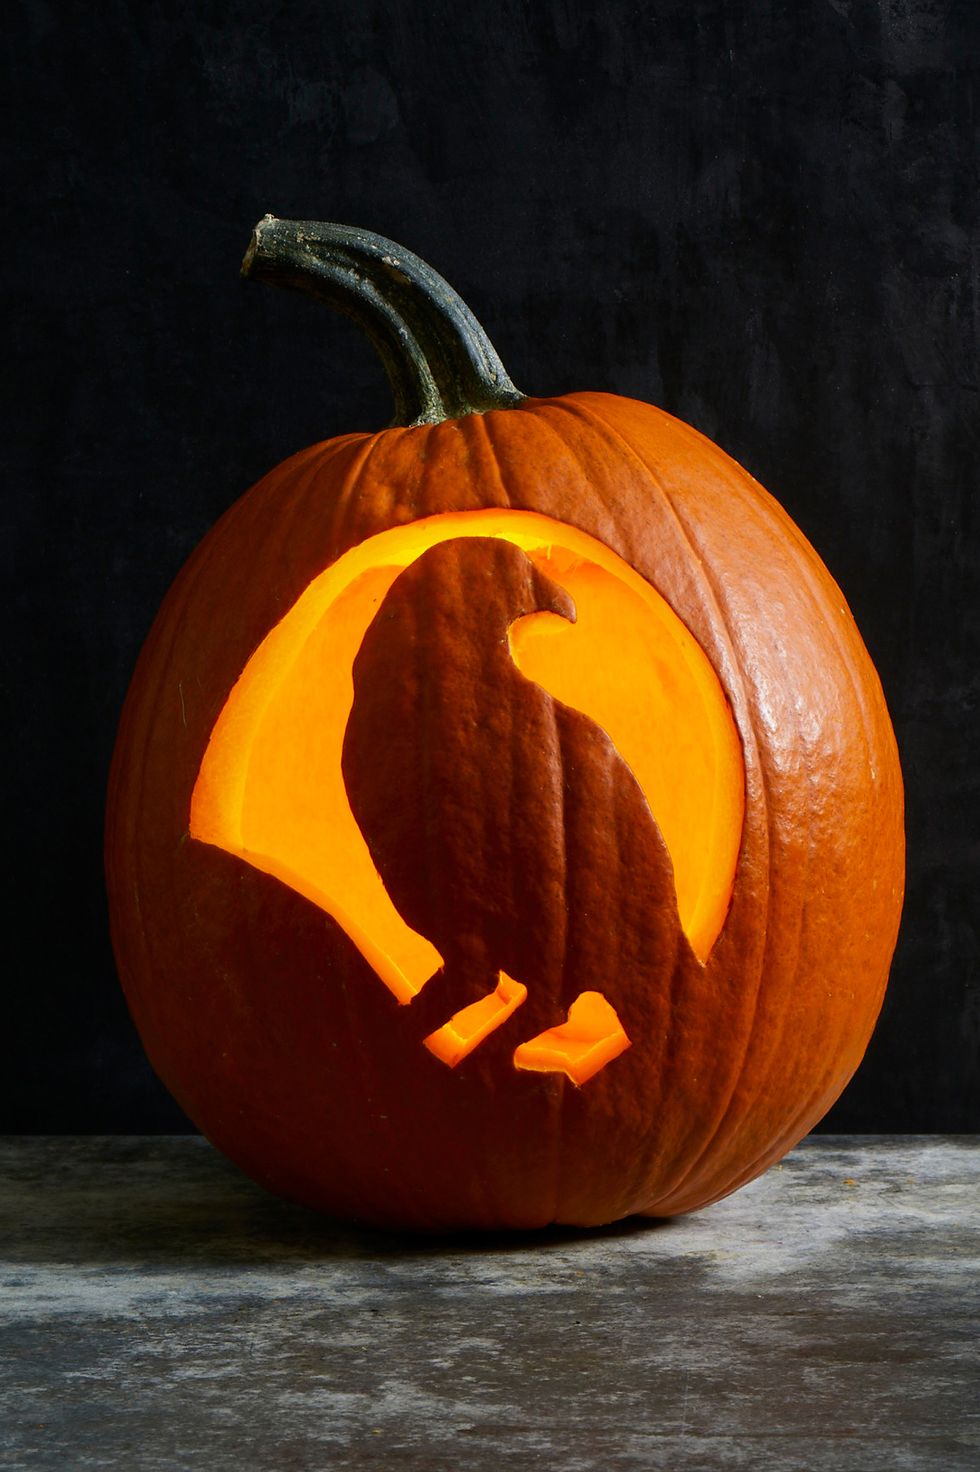 pumpkin carving ideas, pumpkin carved with a crow design